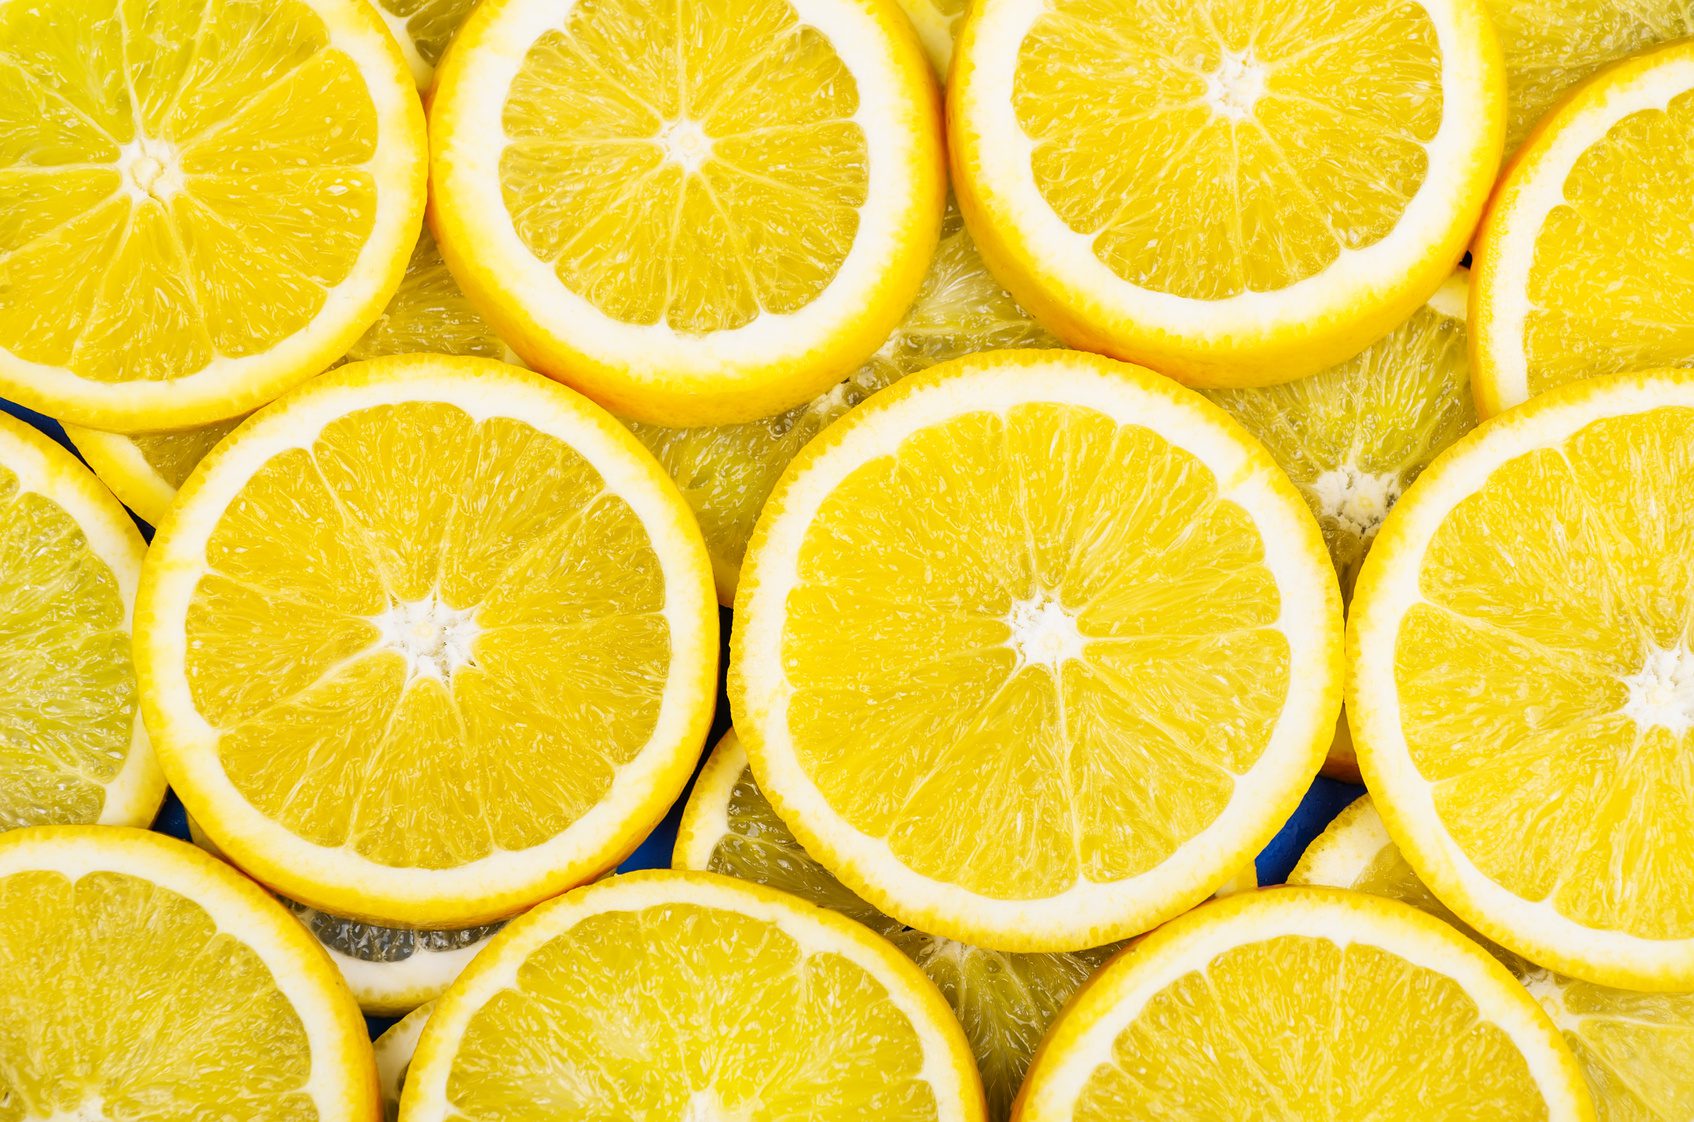 25 Benefits of Lemon You Didn’t Know About